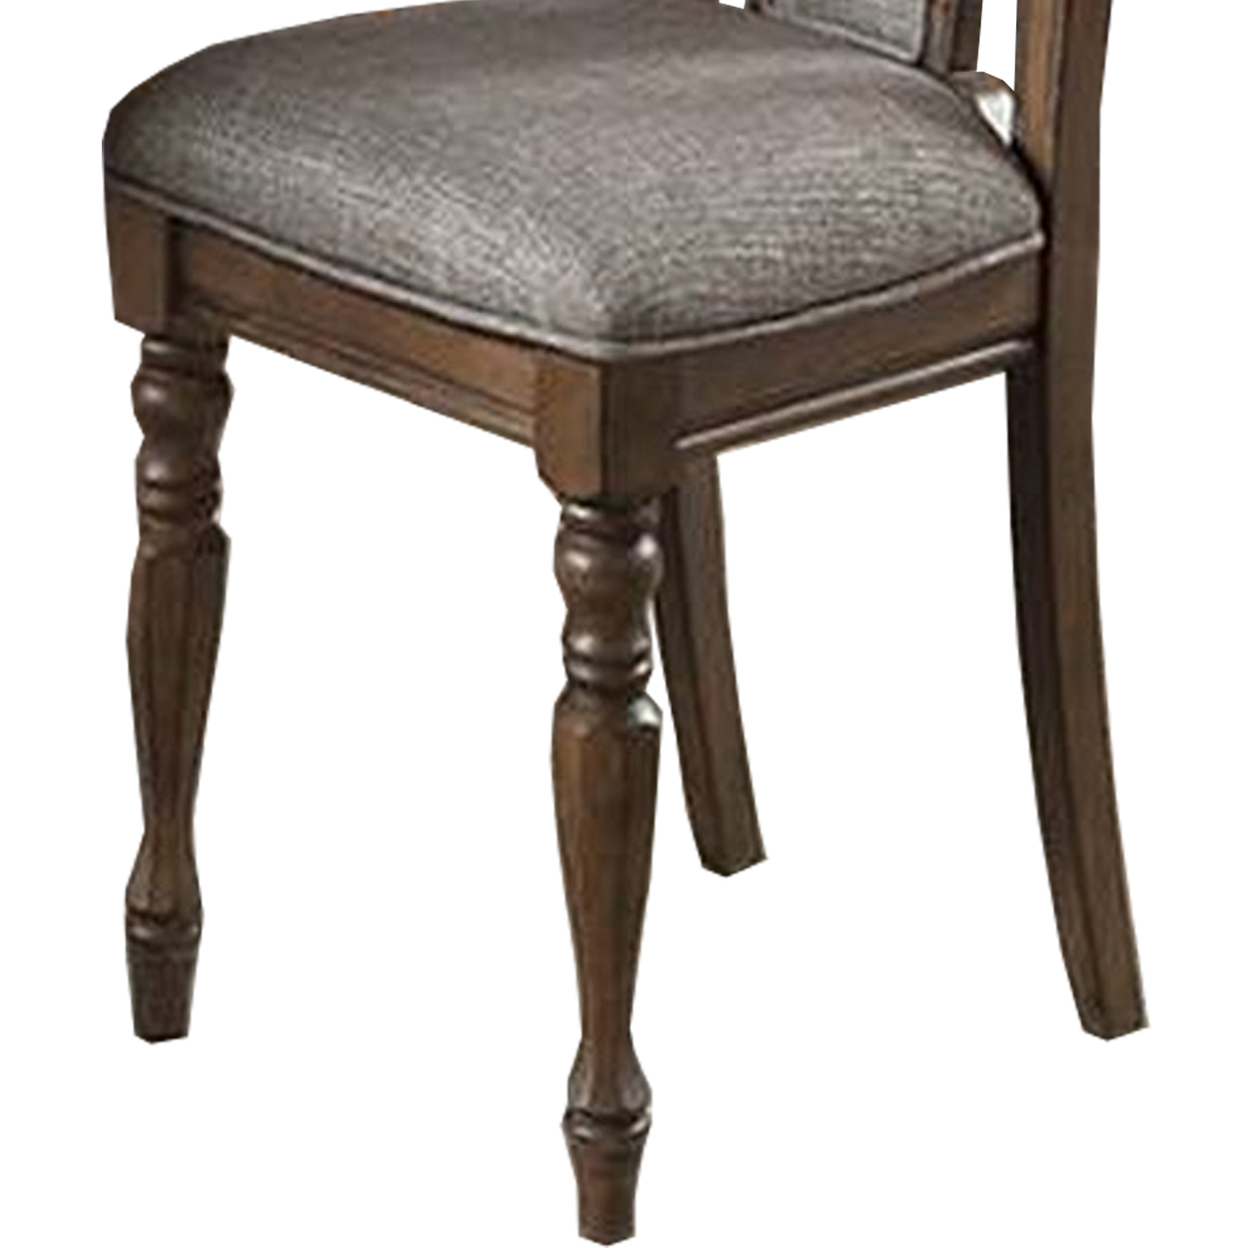 Wooden Dining Chair With Button Tufted Back, Set Of 2, Brown And Gray- Saltoro Sherpi